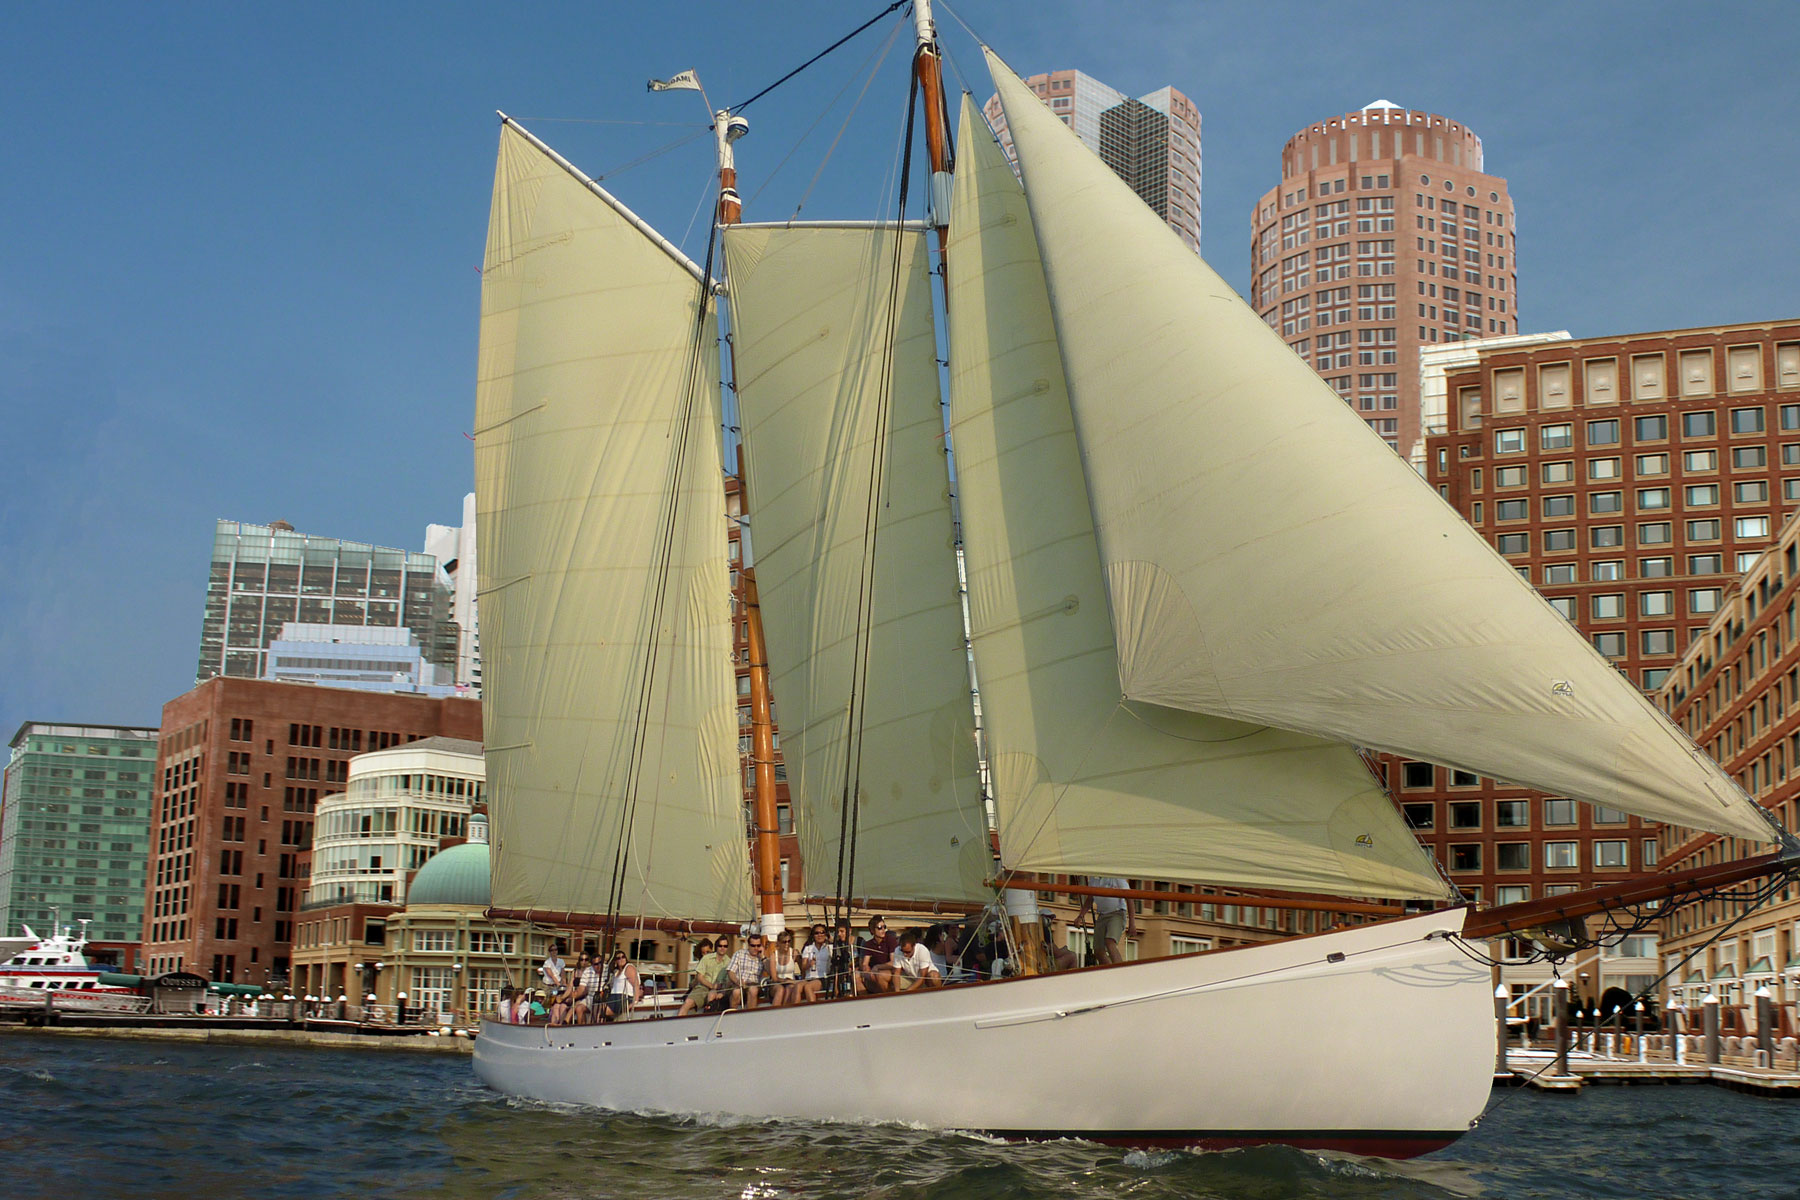 View the Boston skyline from this tall ship